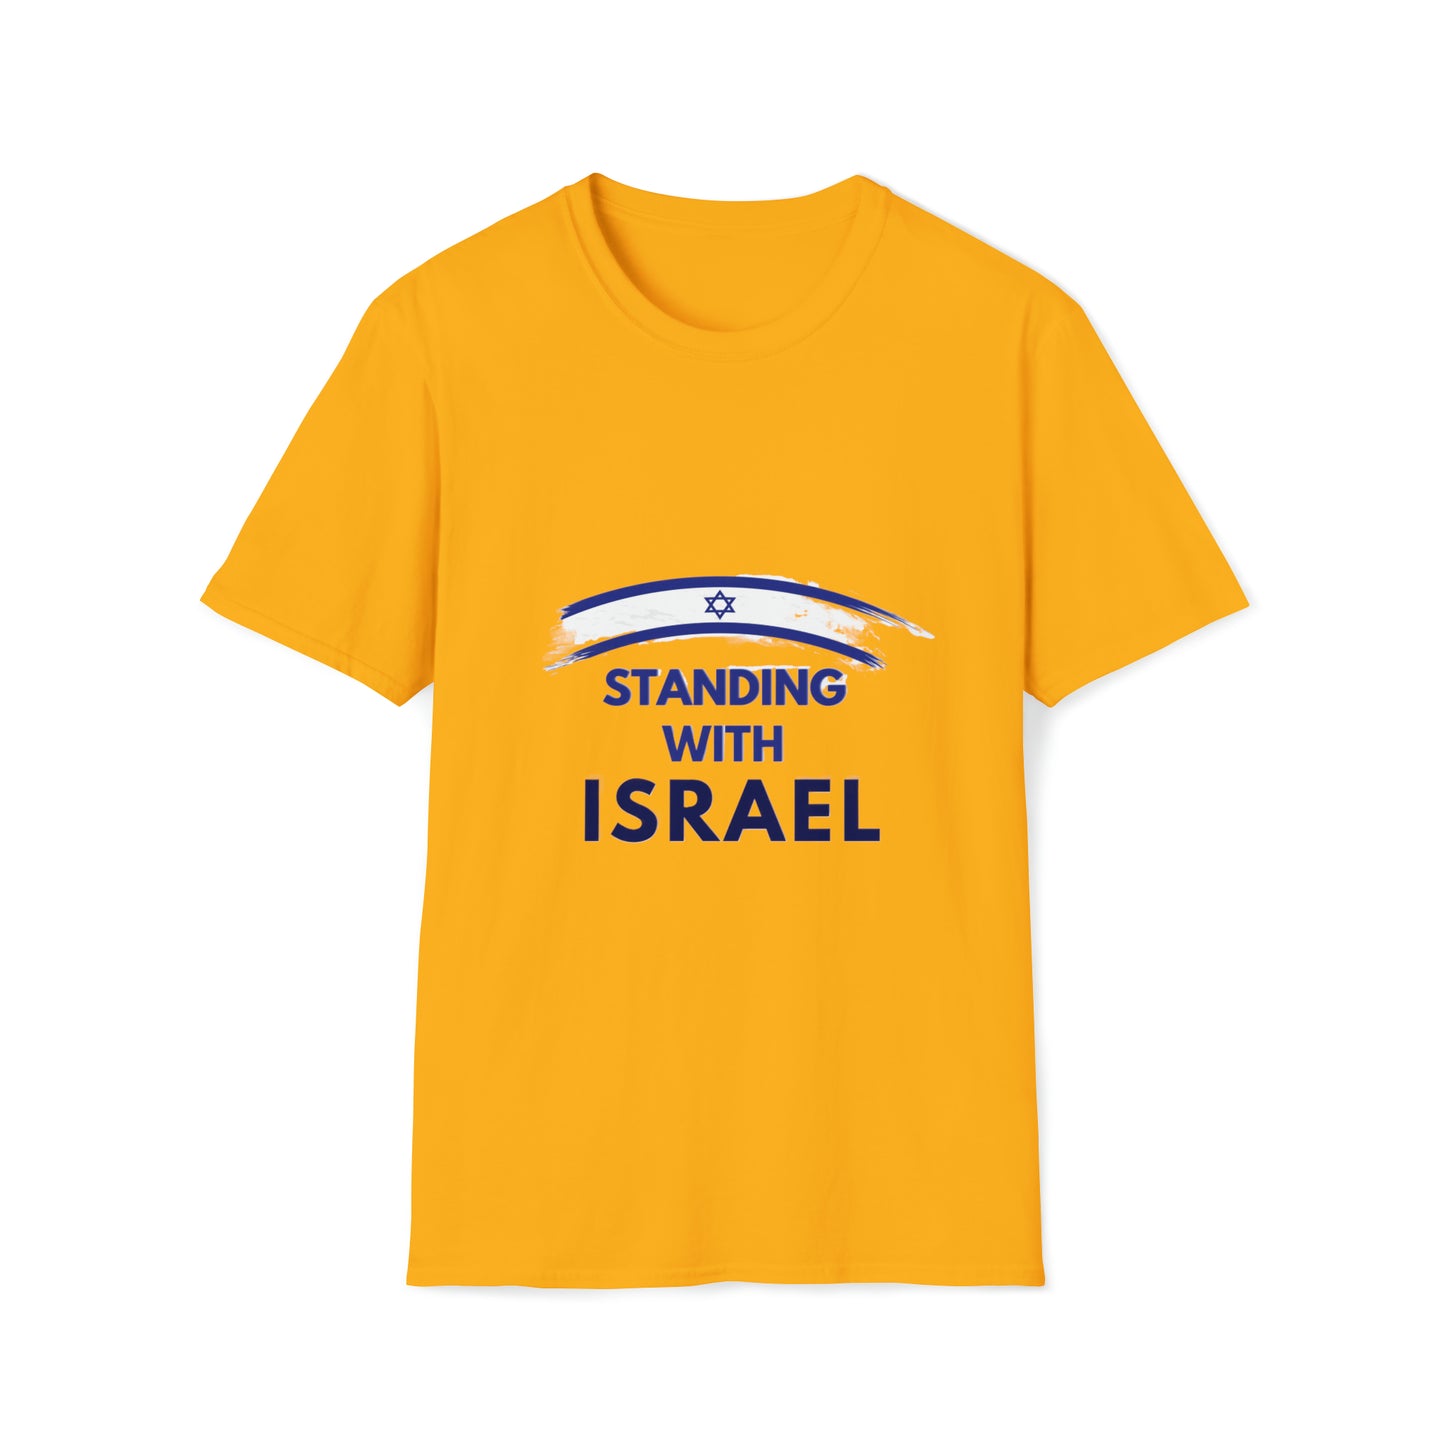 Standing with Israel T-Shirt